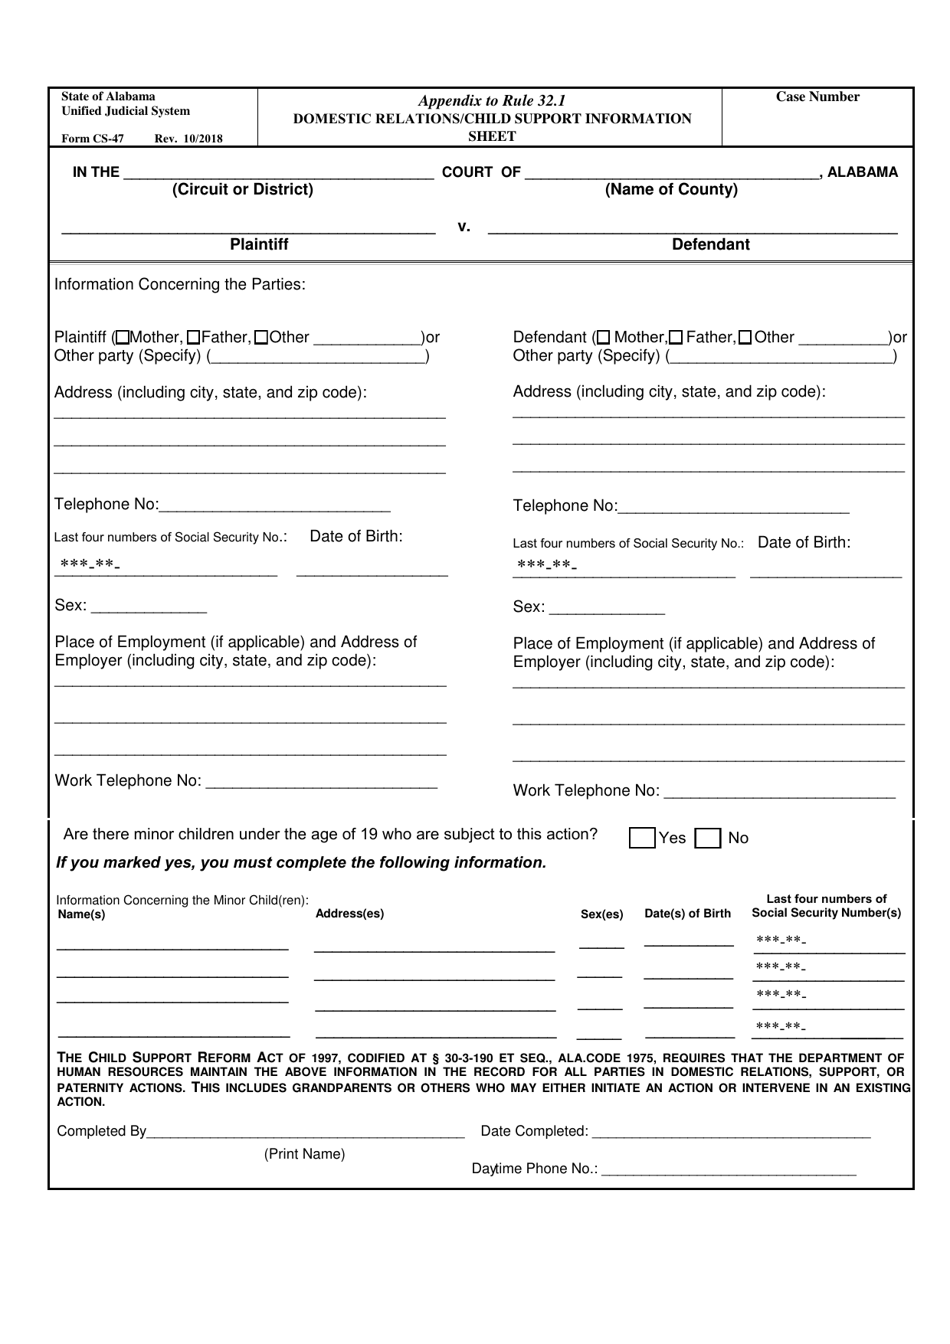 form-cs-47-download-fillable-pdf-or-fill-online-domestic-relations